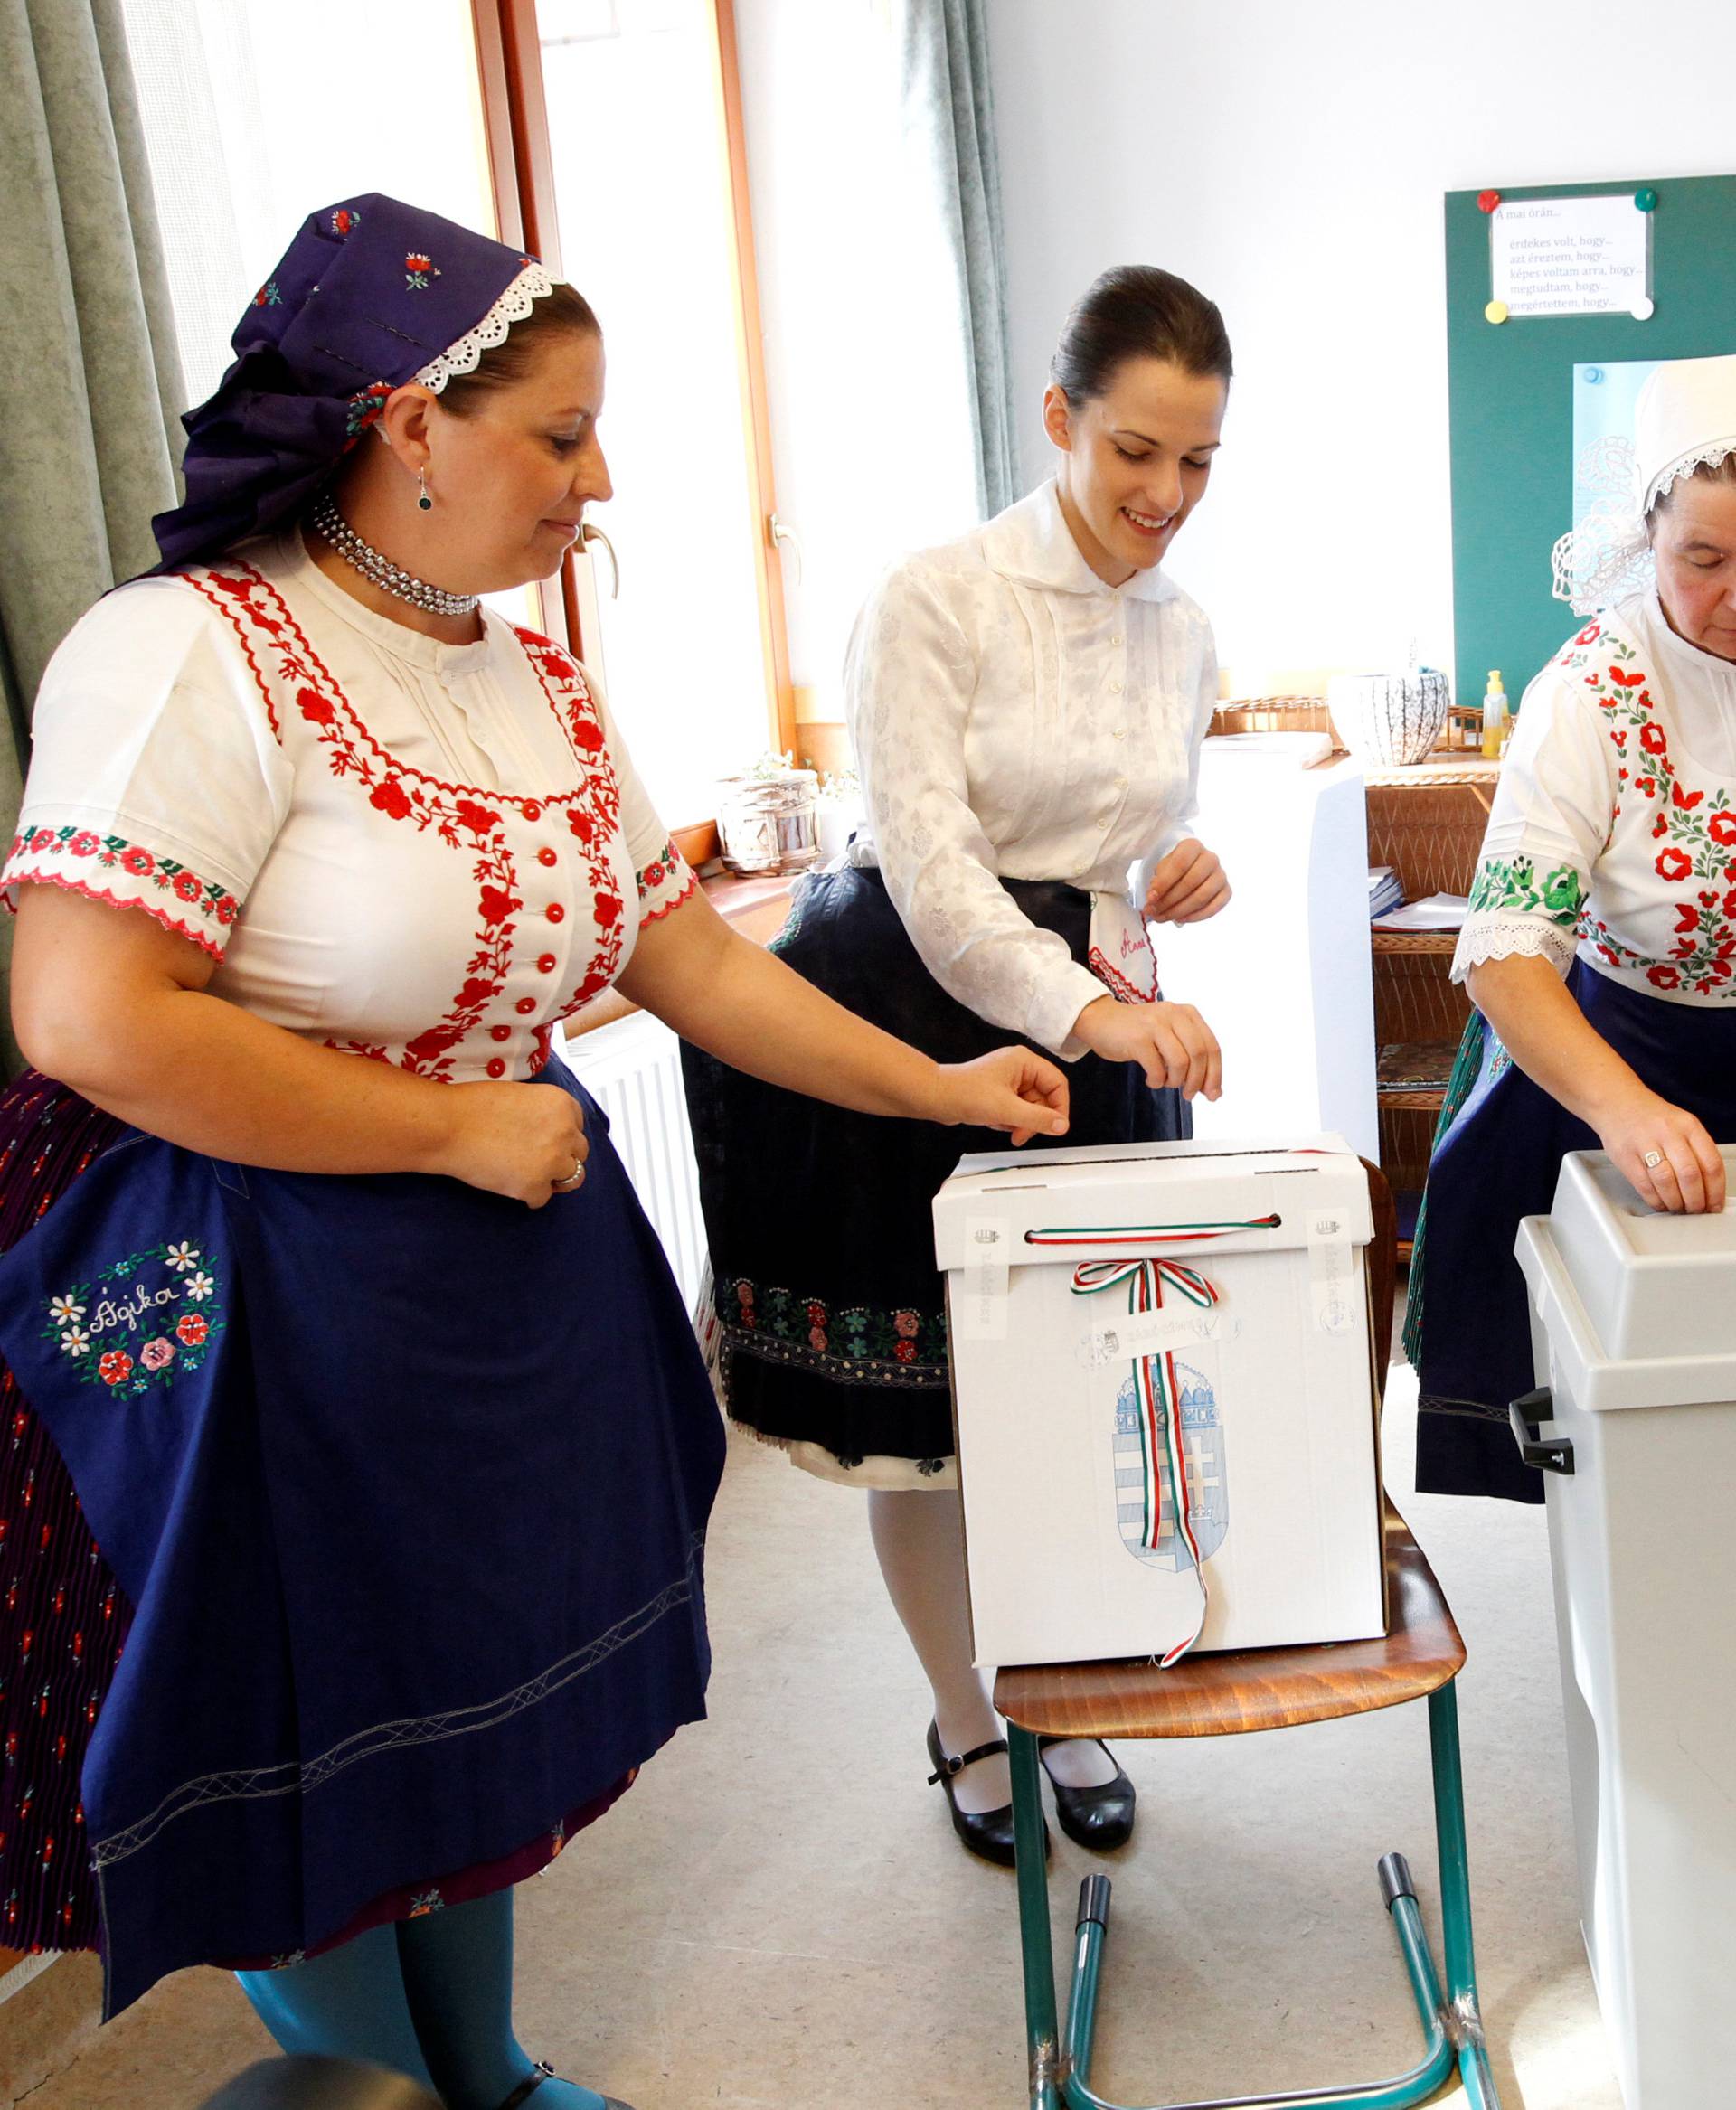 Hungarian women wearing traditional costumes attend a referendum on EU migrant quotas in Veresegyhaz